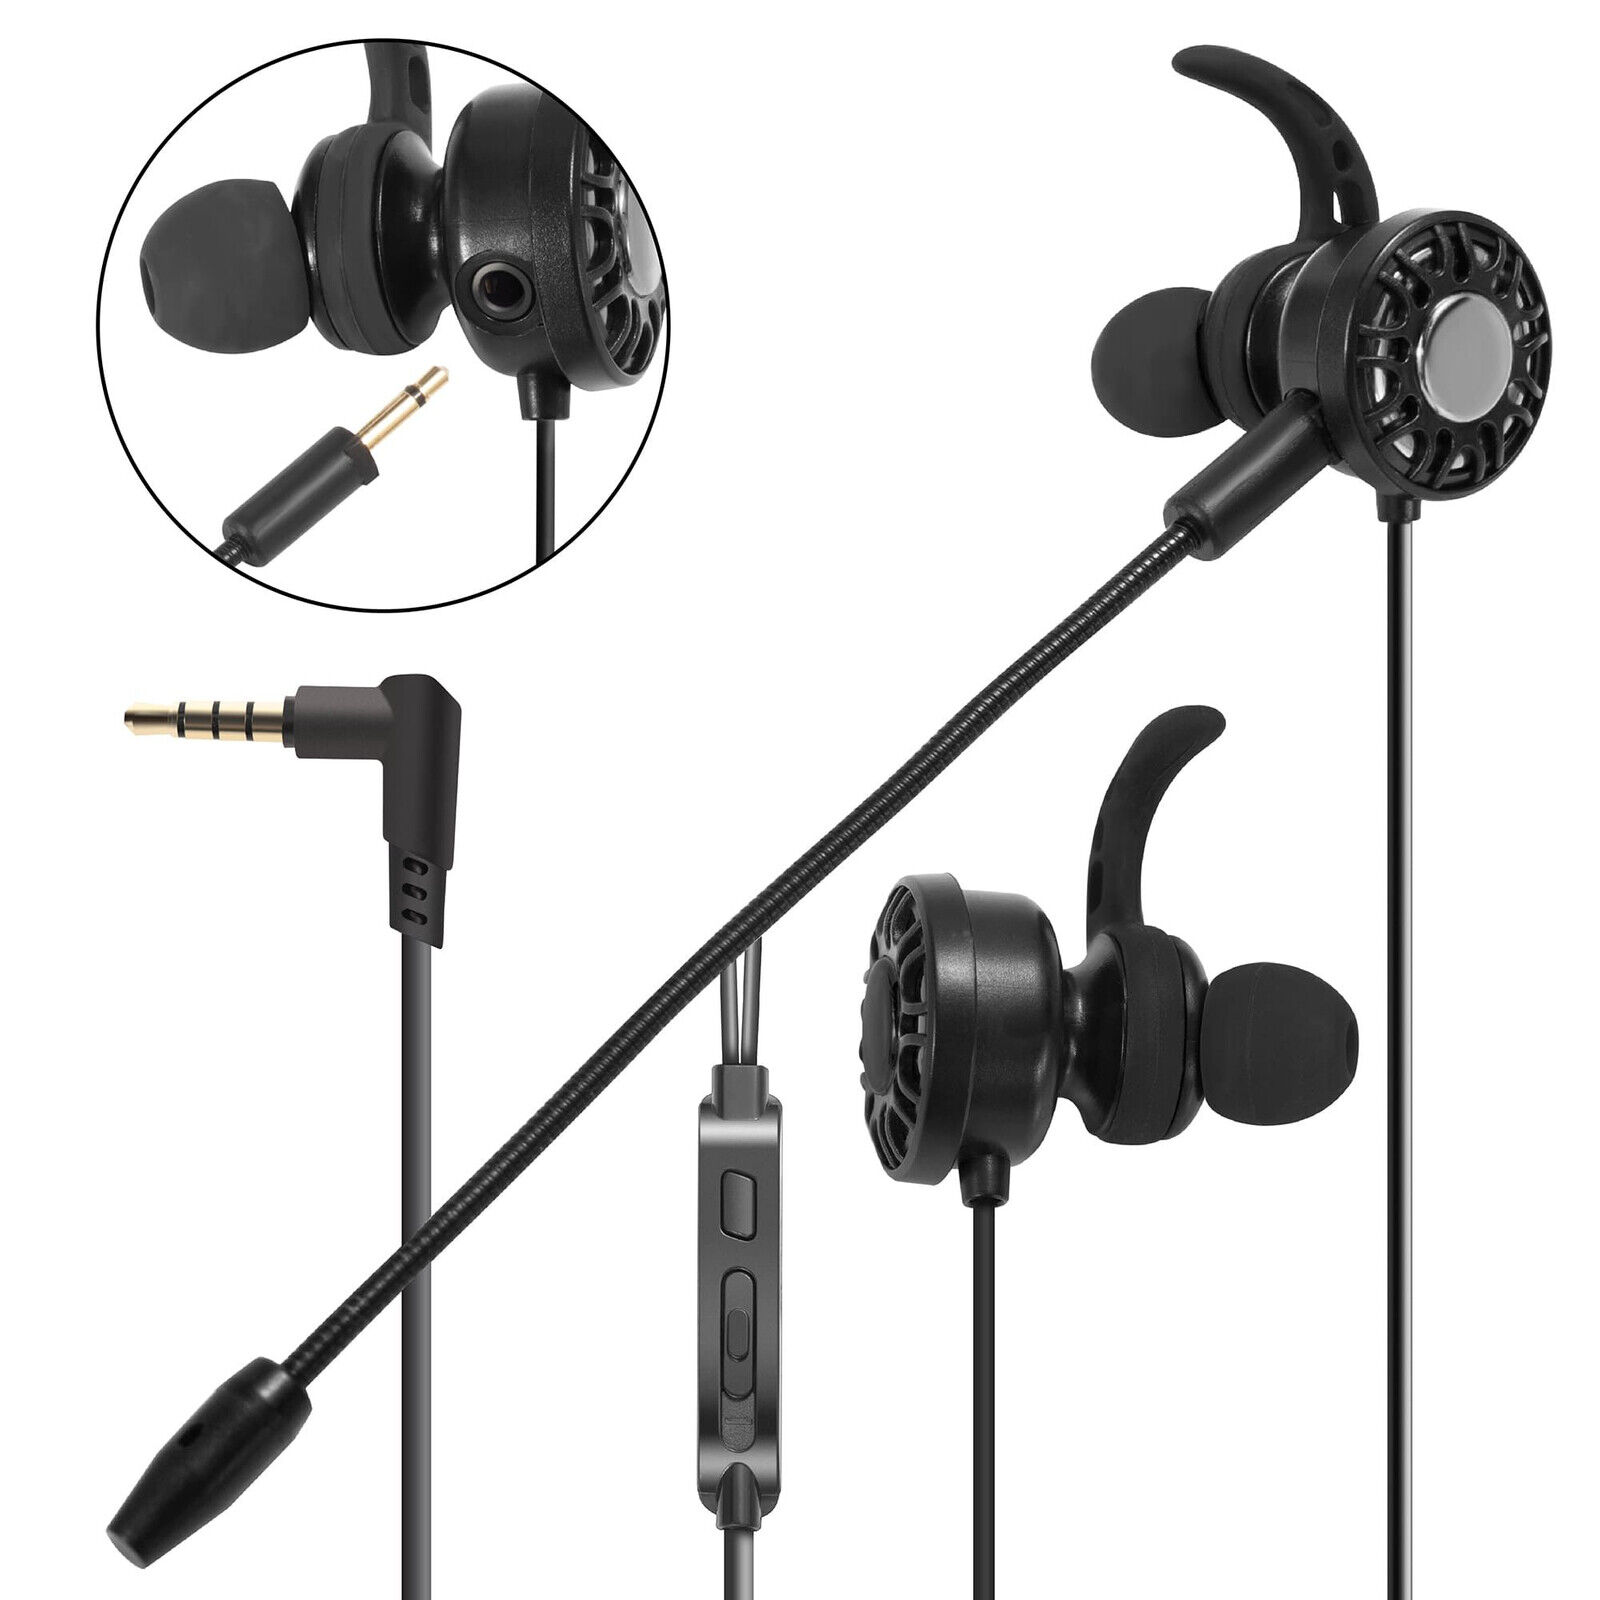 In-Ear PC Music Gaming Headset Headphone Earphone, 3.5mm Stereo for PS4 Xbox